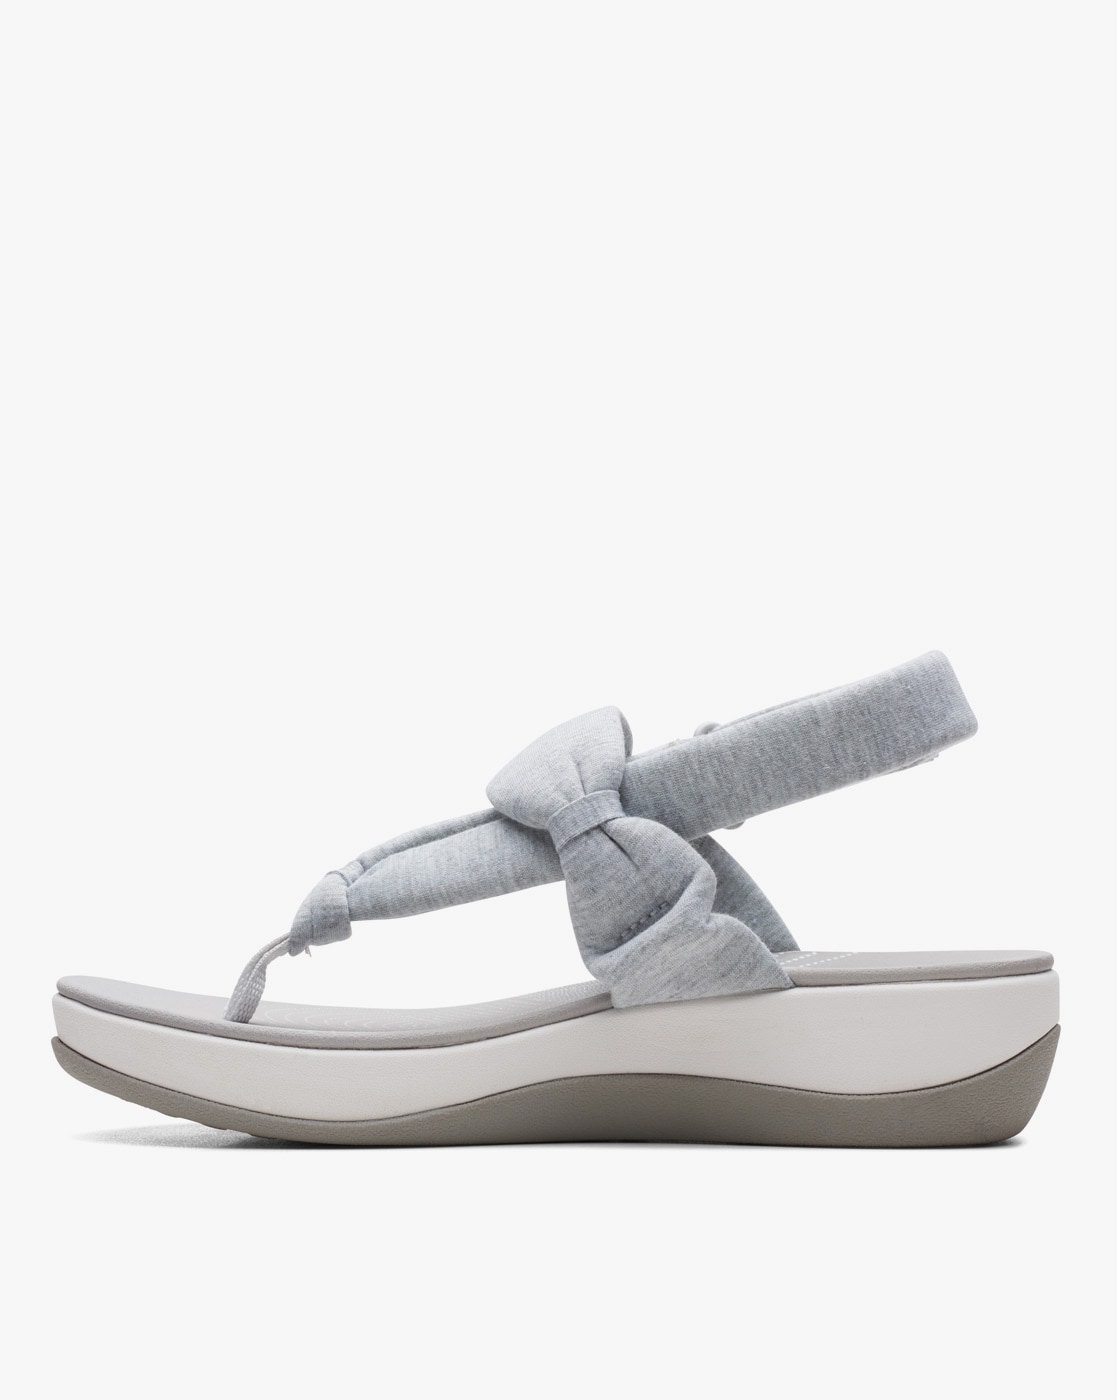 Crocs Swiftwater Webbing Bright Coral/Light Grey Women Sandal [204804-6PK]  7 in Sonbhadra at best price by Lokesh Shoes Center - Justdial